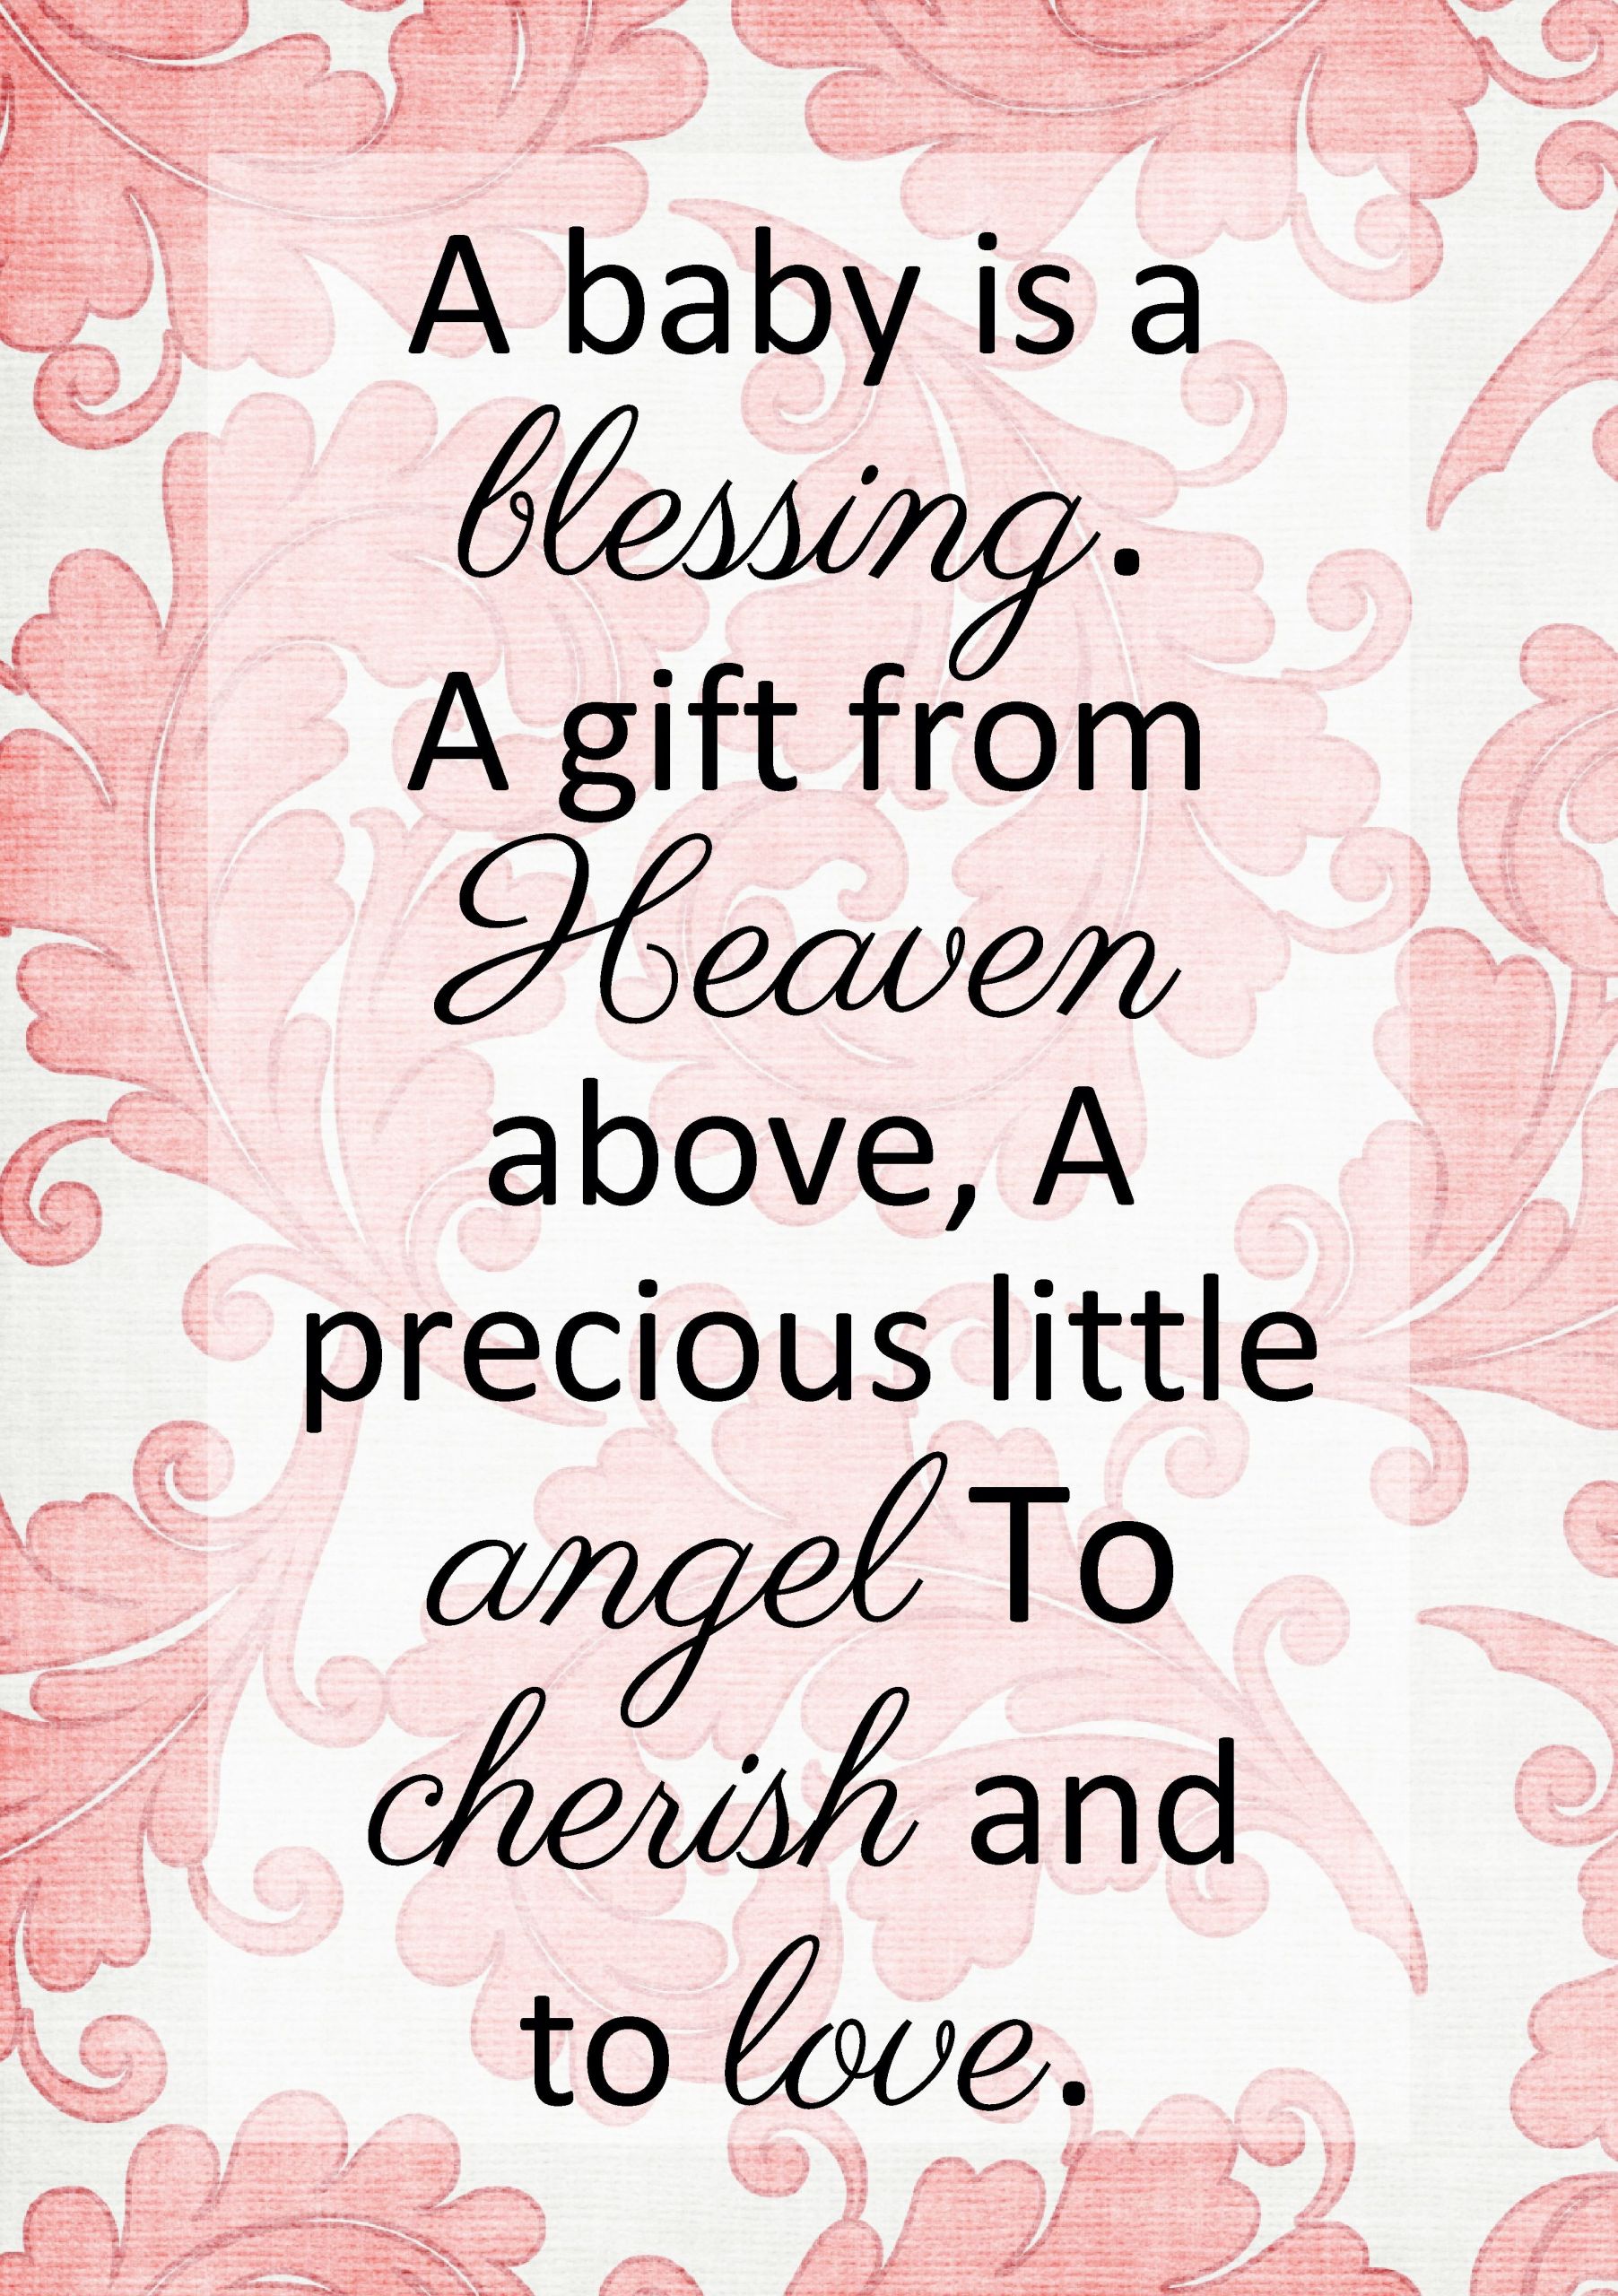 New Baby Gift Message
 A Baby is a Blessing a t from Heaven above A precious